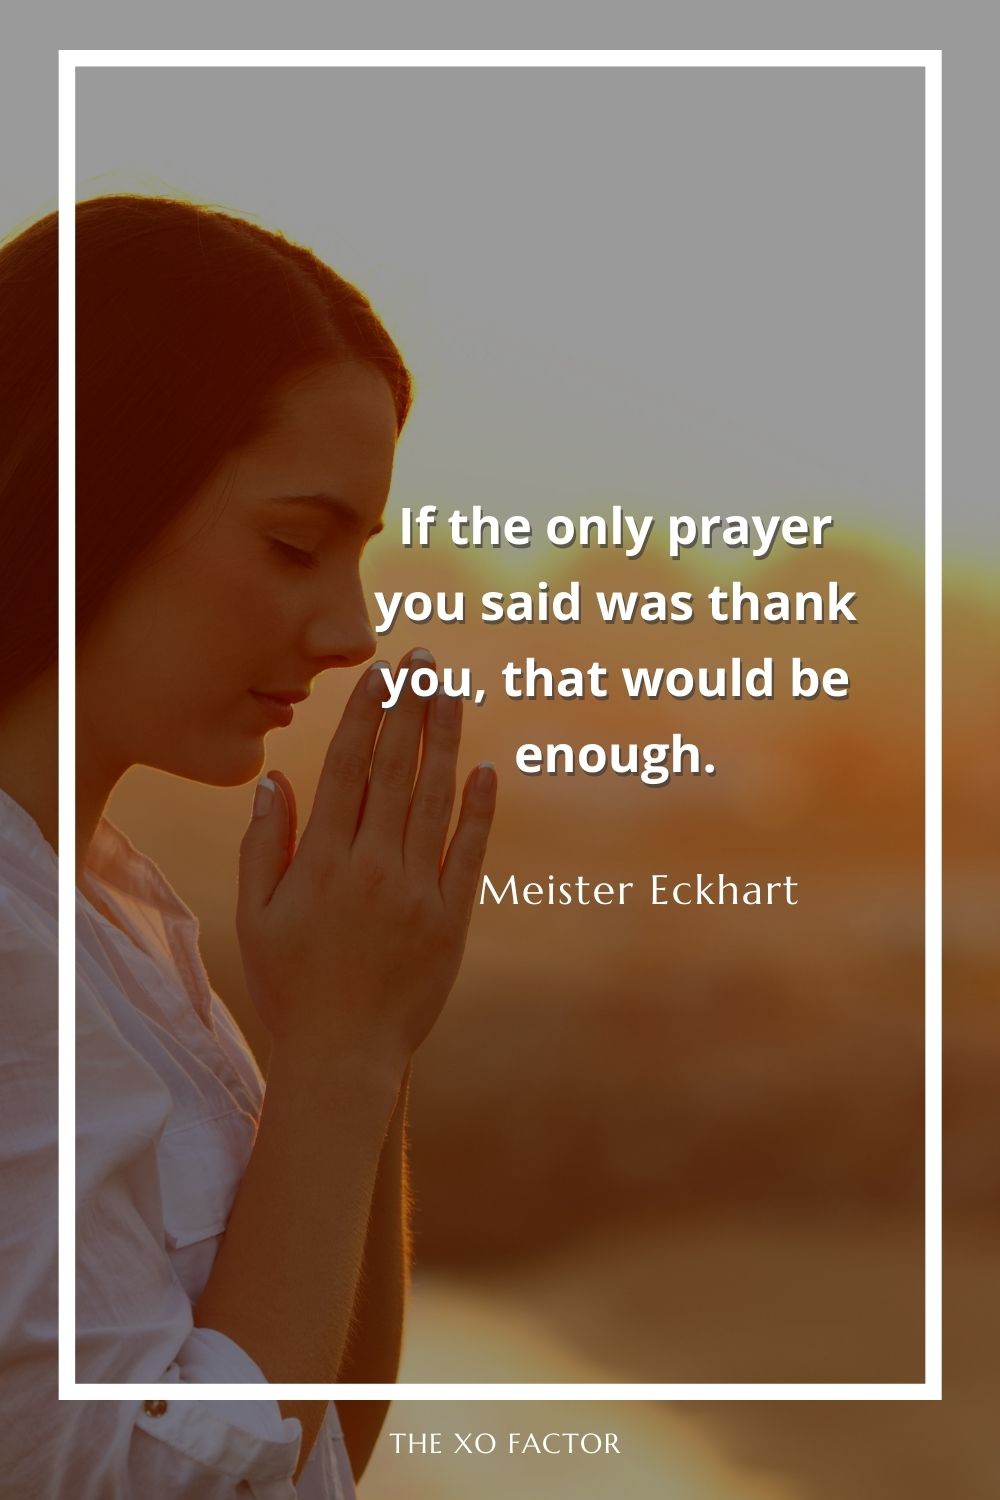 If the only prayer you said was thank you, that would be enough.